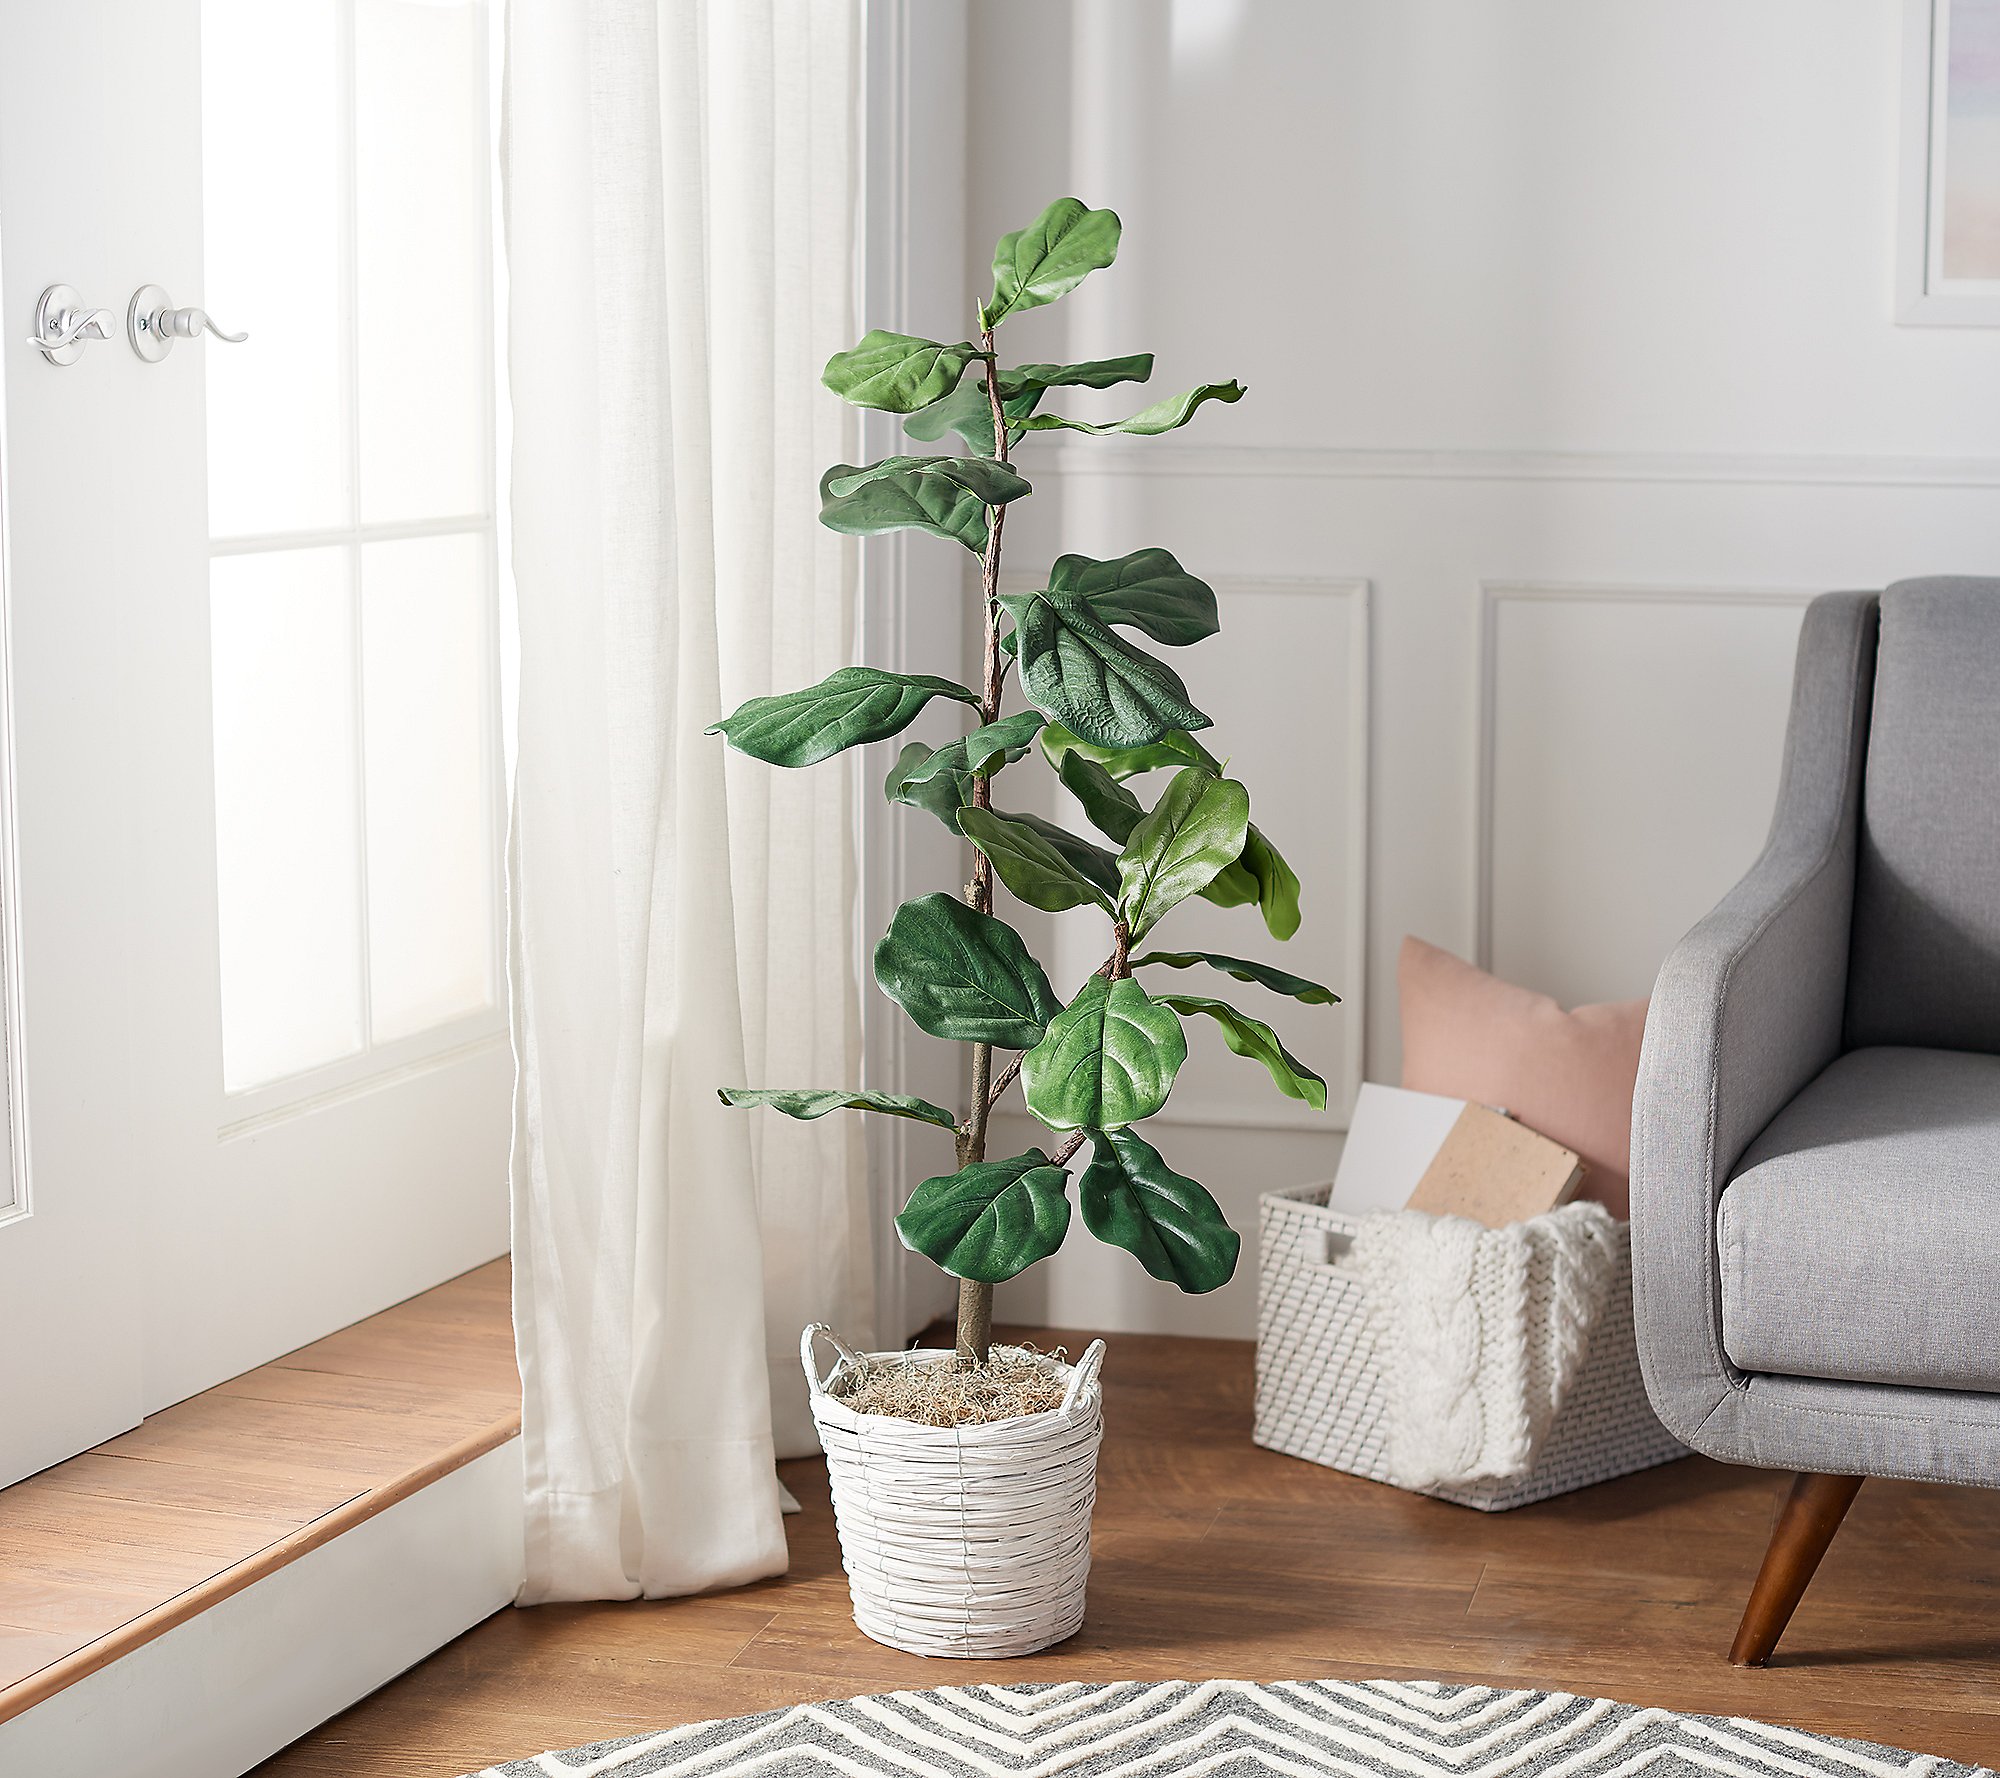 Shop 4' Faux Fiddle Leaf Tree in Starter Pot by Valerie from QVC on Openhaus